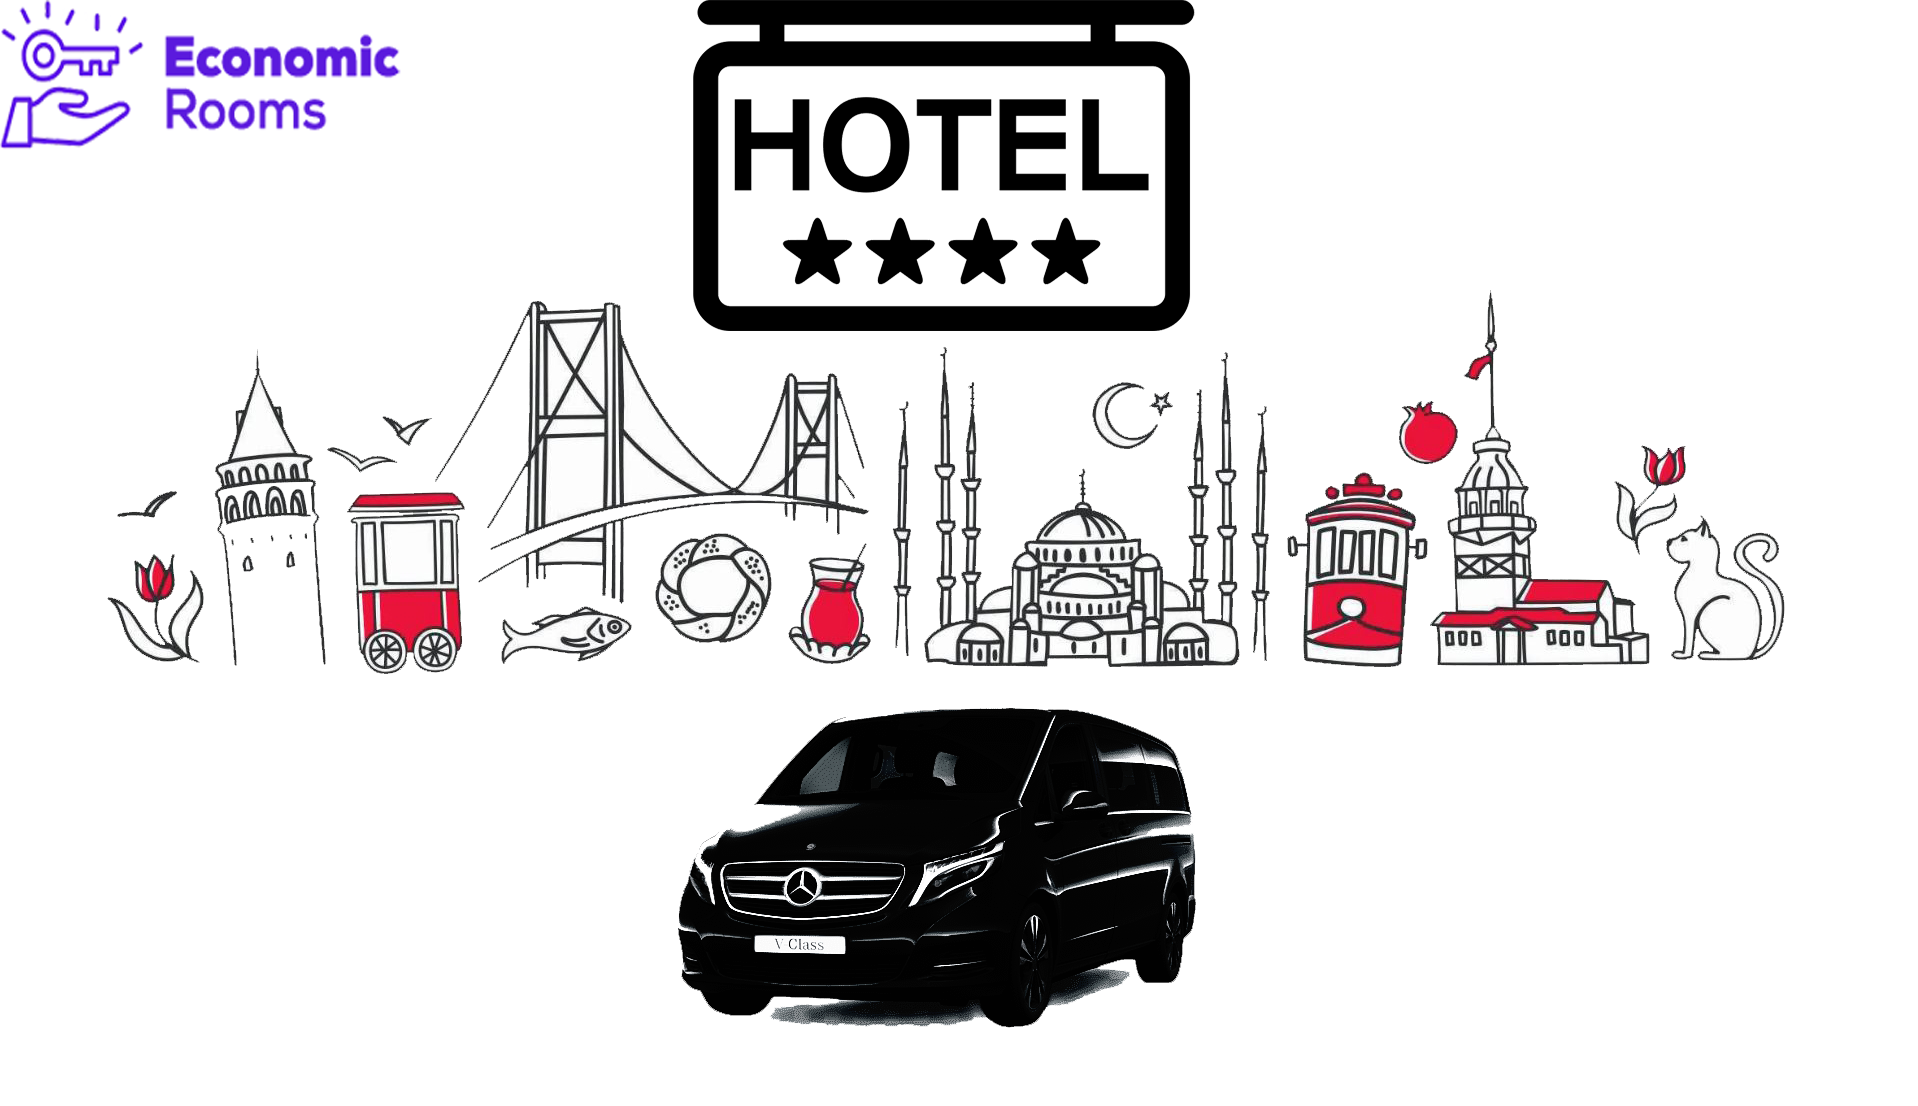 Discover the Heart of Istanbul: 4-Star Luxury, Seamless Transfers, and Historic Old City Tour! (Airport Transfer + 4 Star Hotel + Old City Tour)